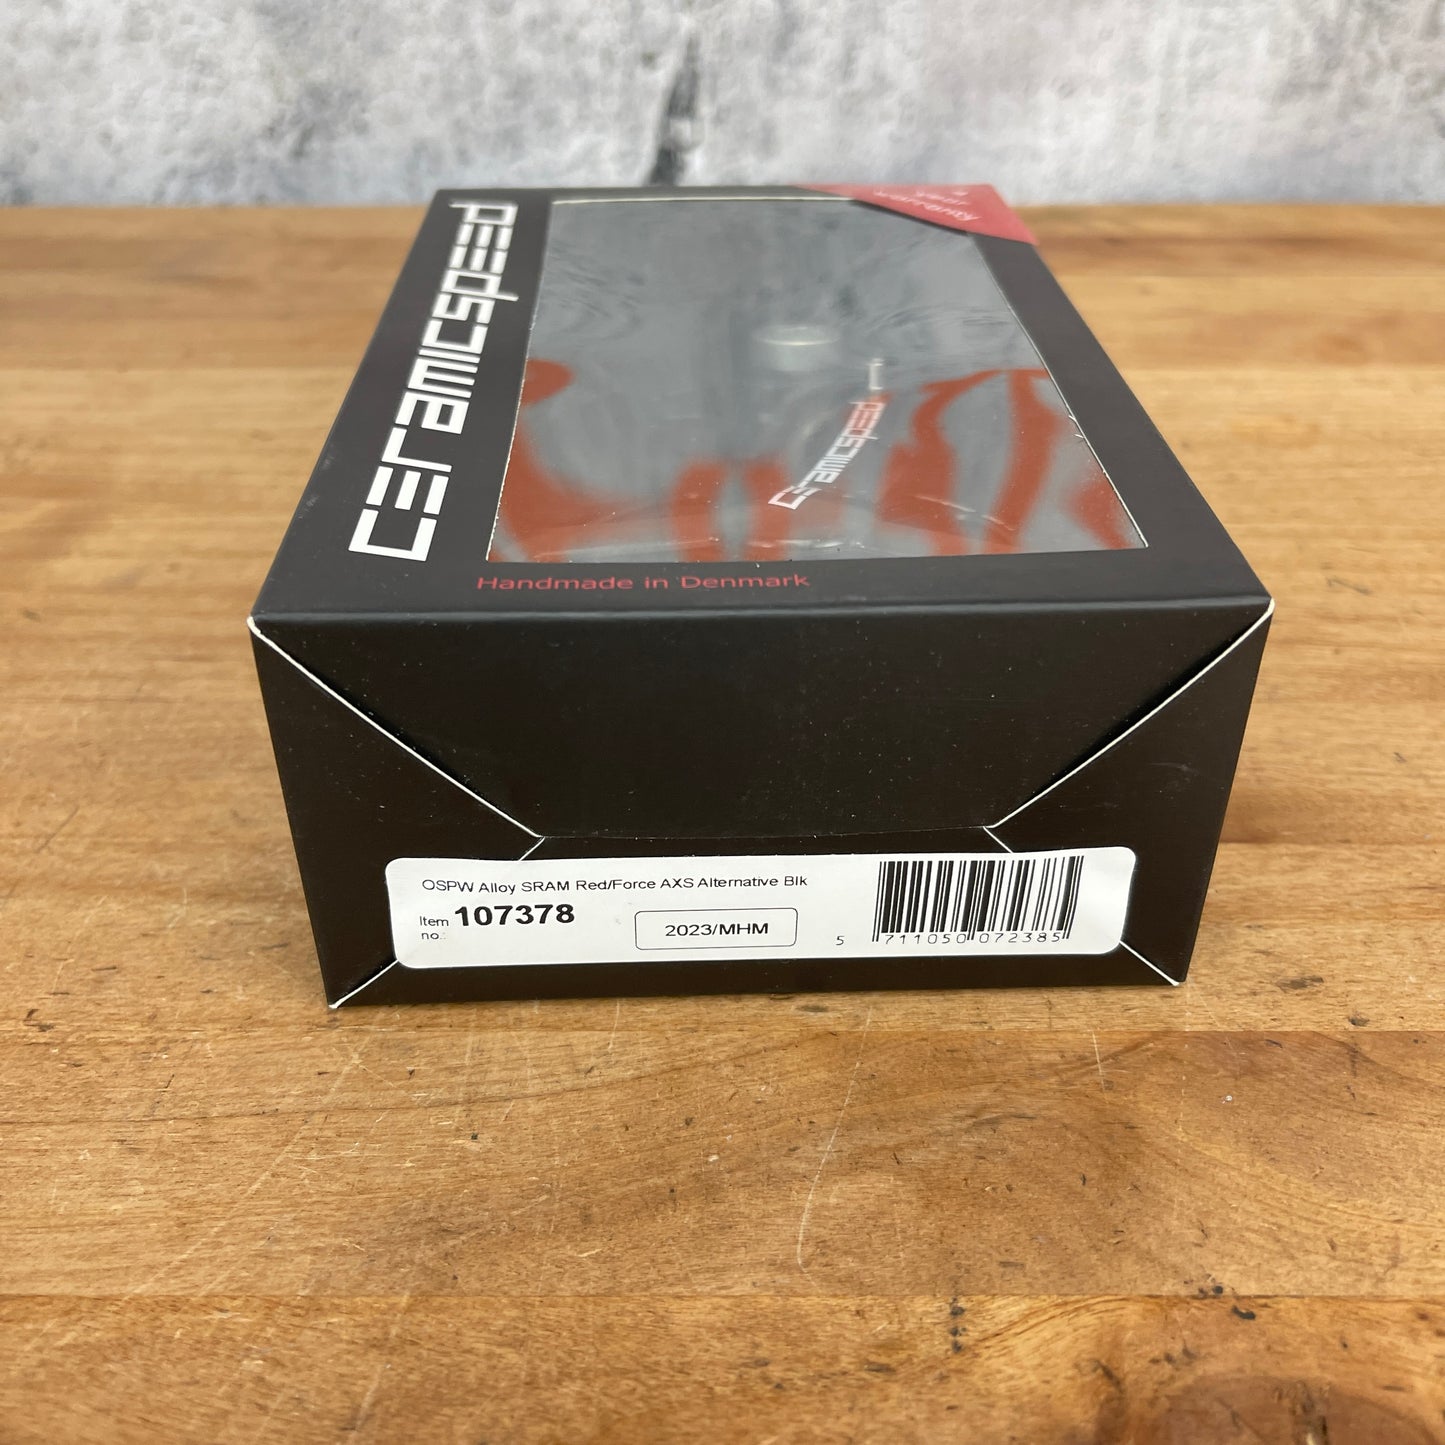 New! Ceramicspeed OSPW SRAM RED/Force AXS 12-speed Derailleur Cage 107378